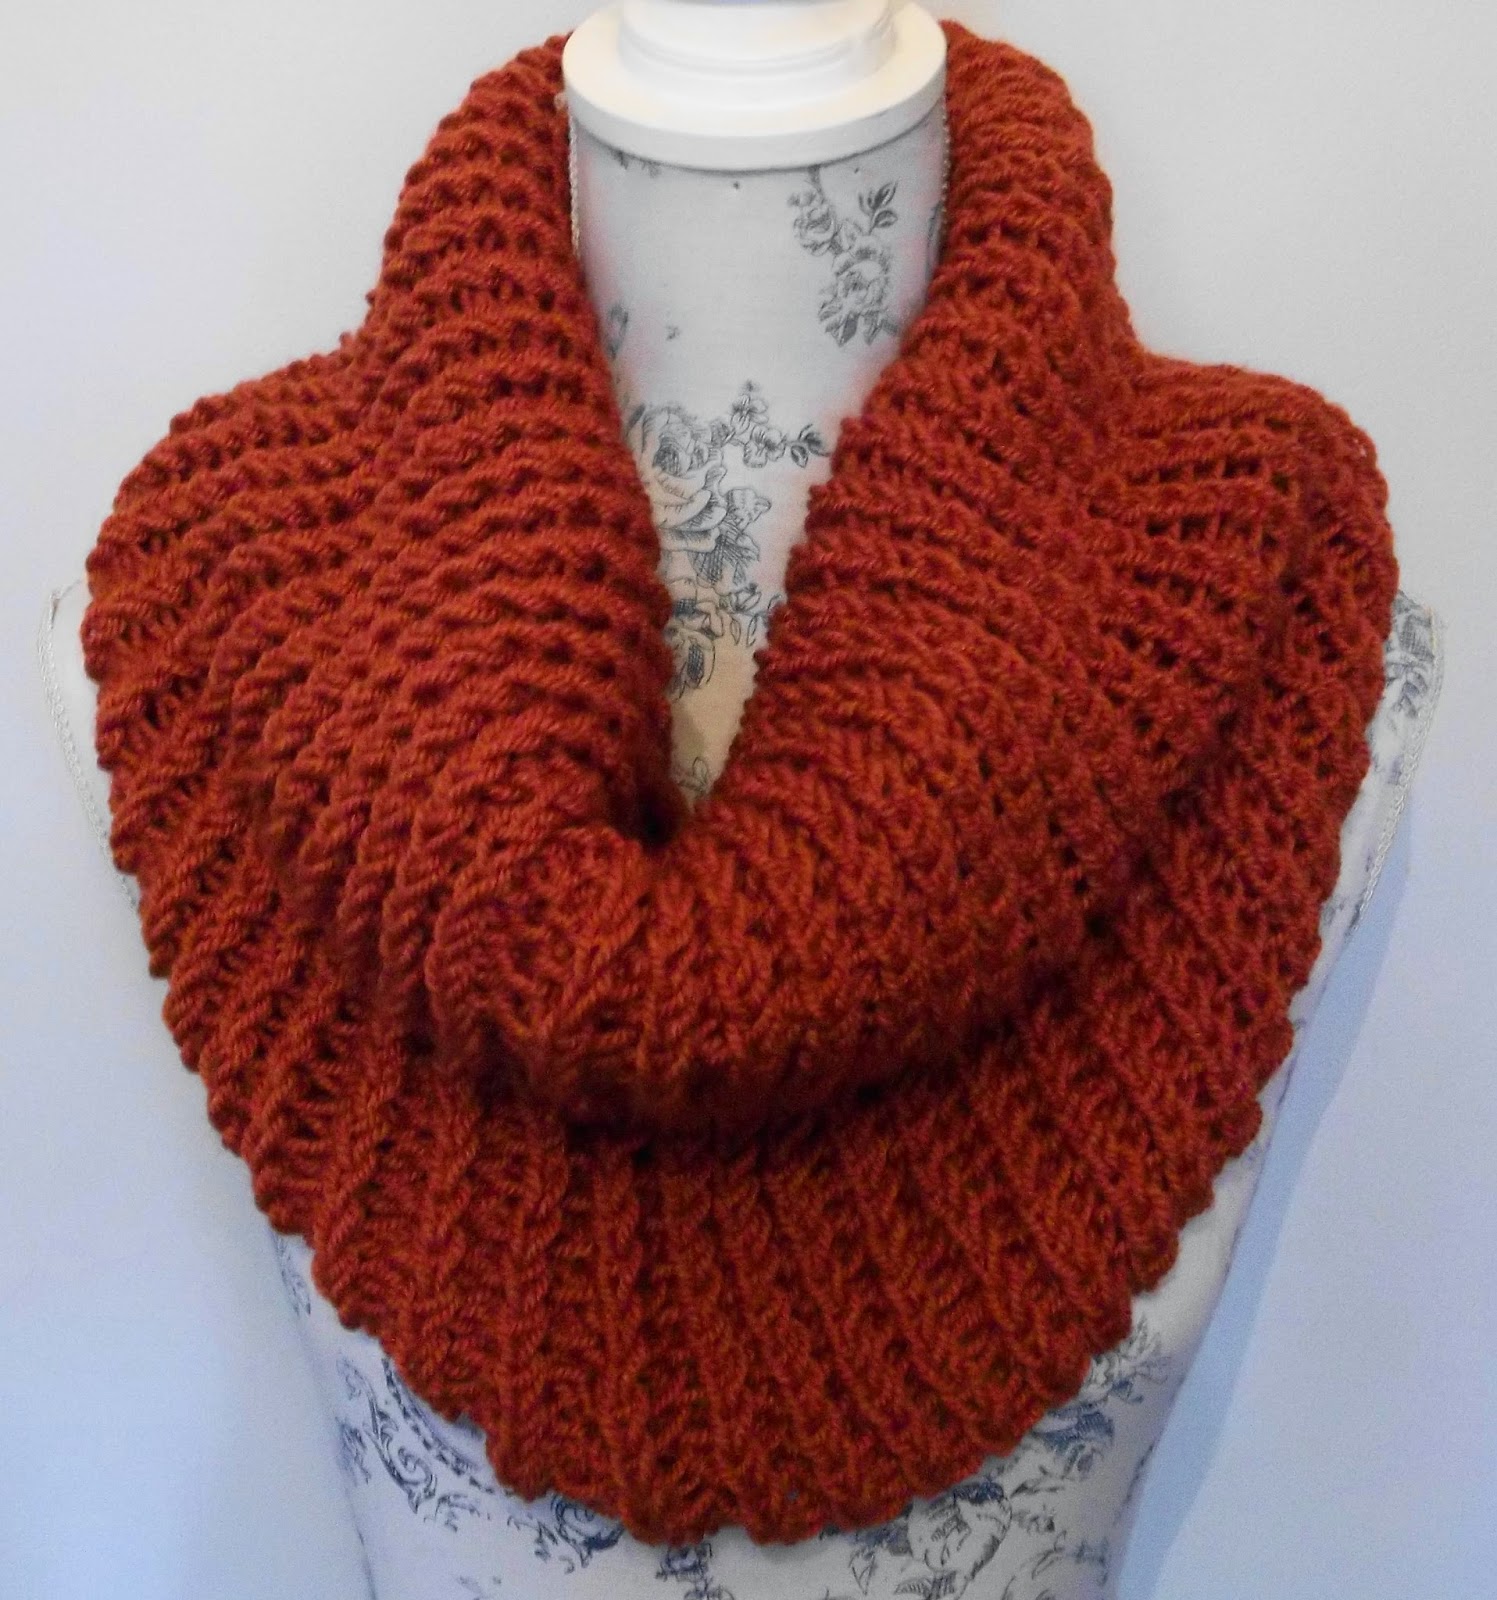 HAND KNITTING PATTERNS. ARAN. COWLS, HATS, SCARVES AND NECK WARMERS